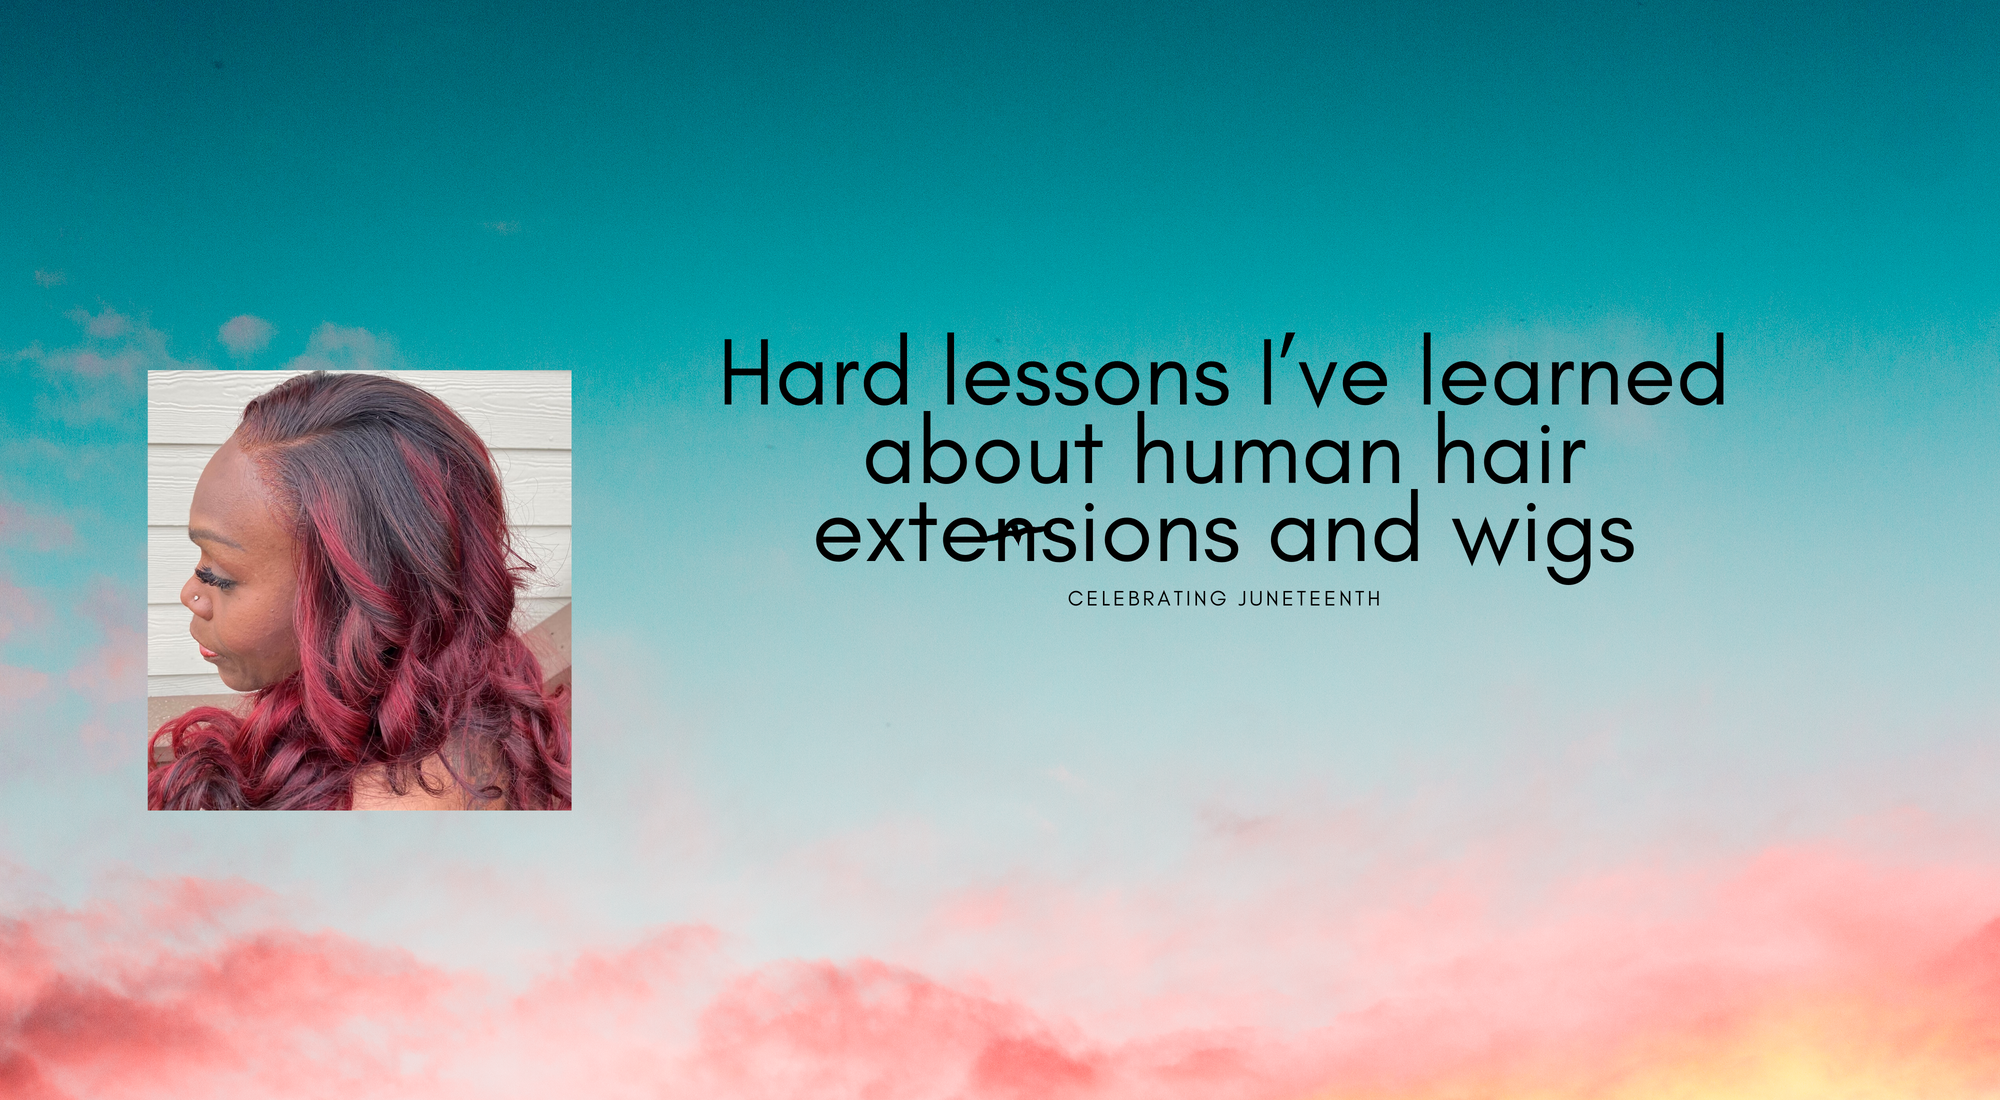 Hard lessons I’ve learned about human hair extensions and wigs